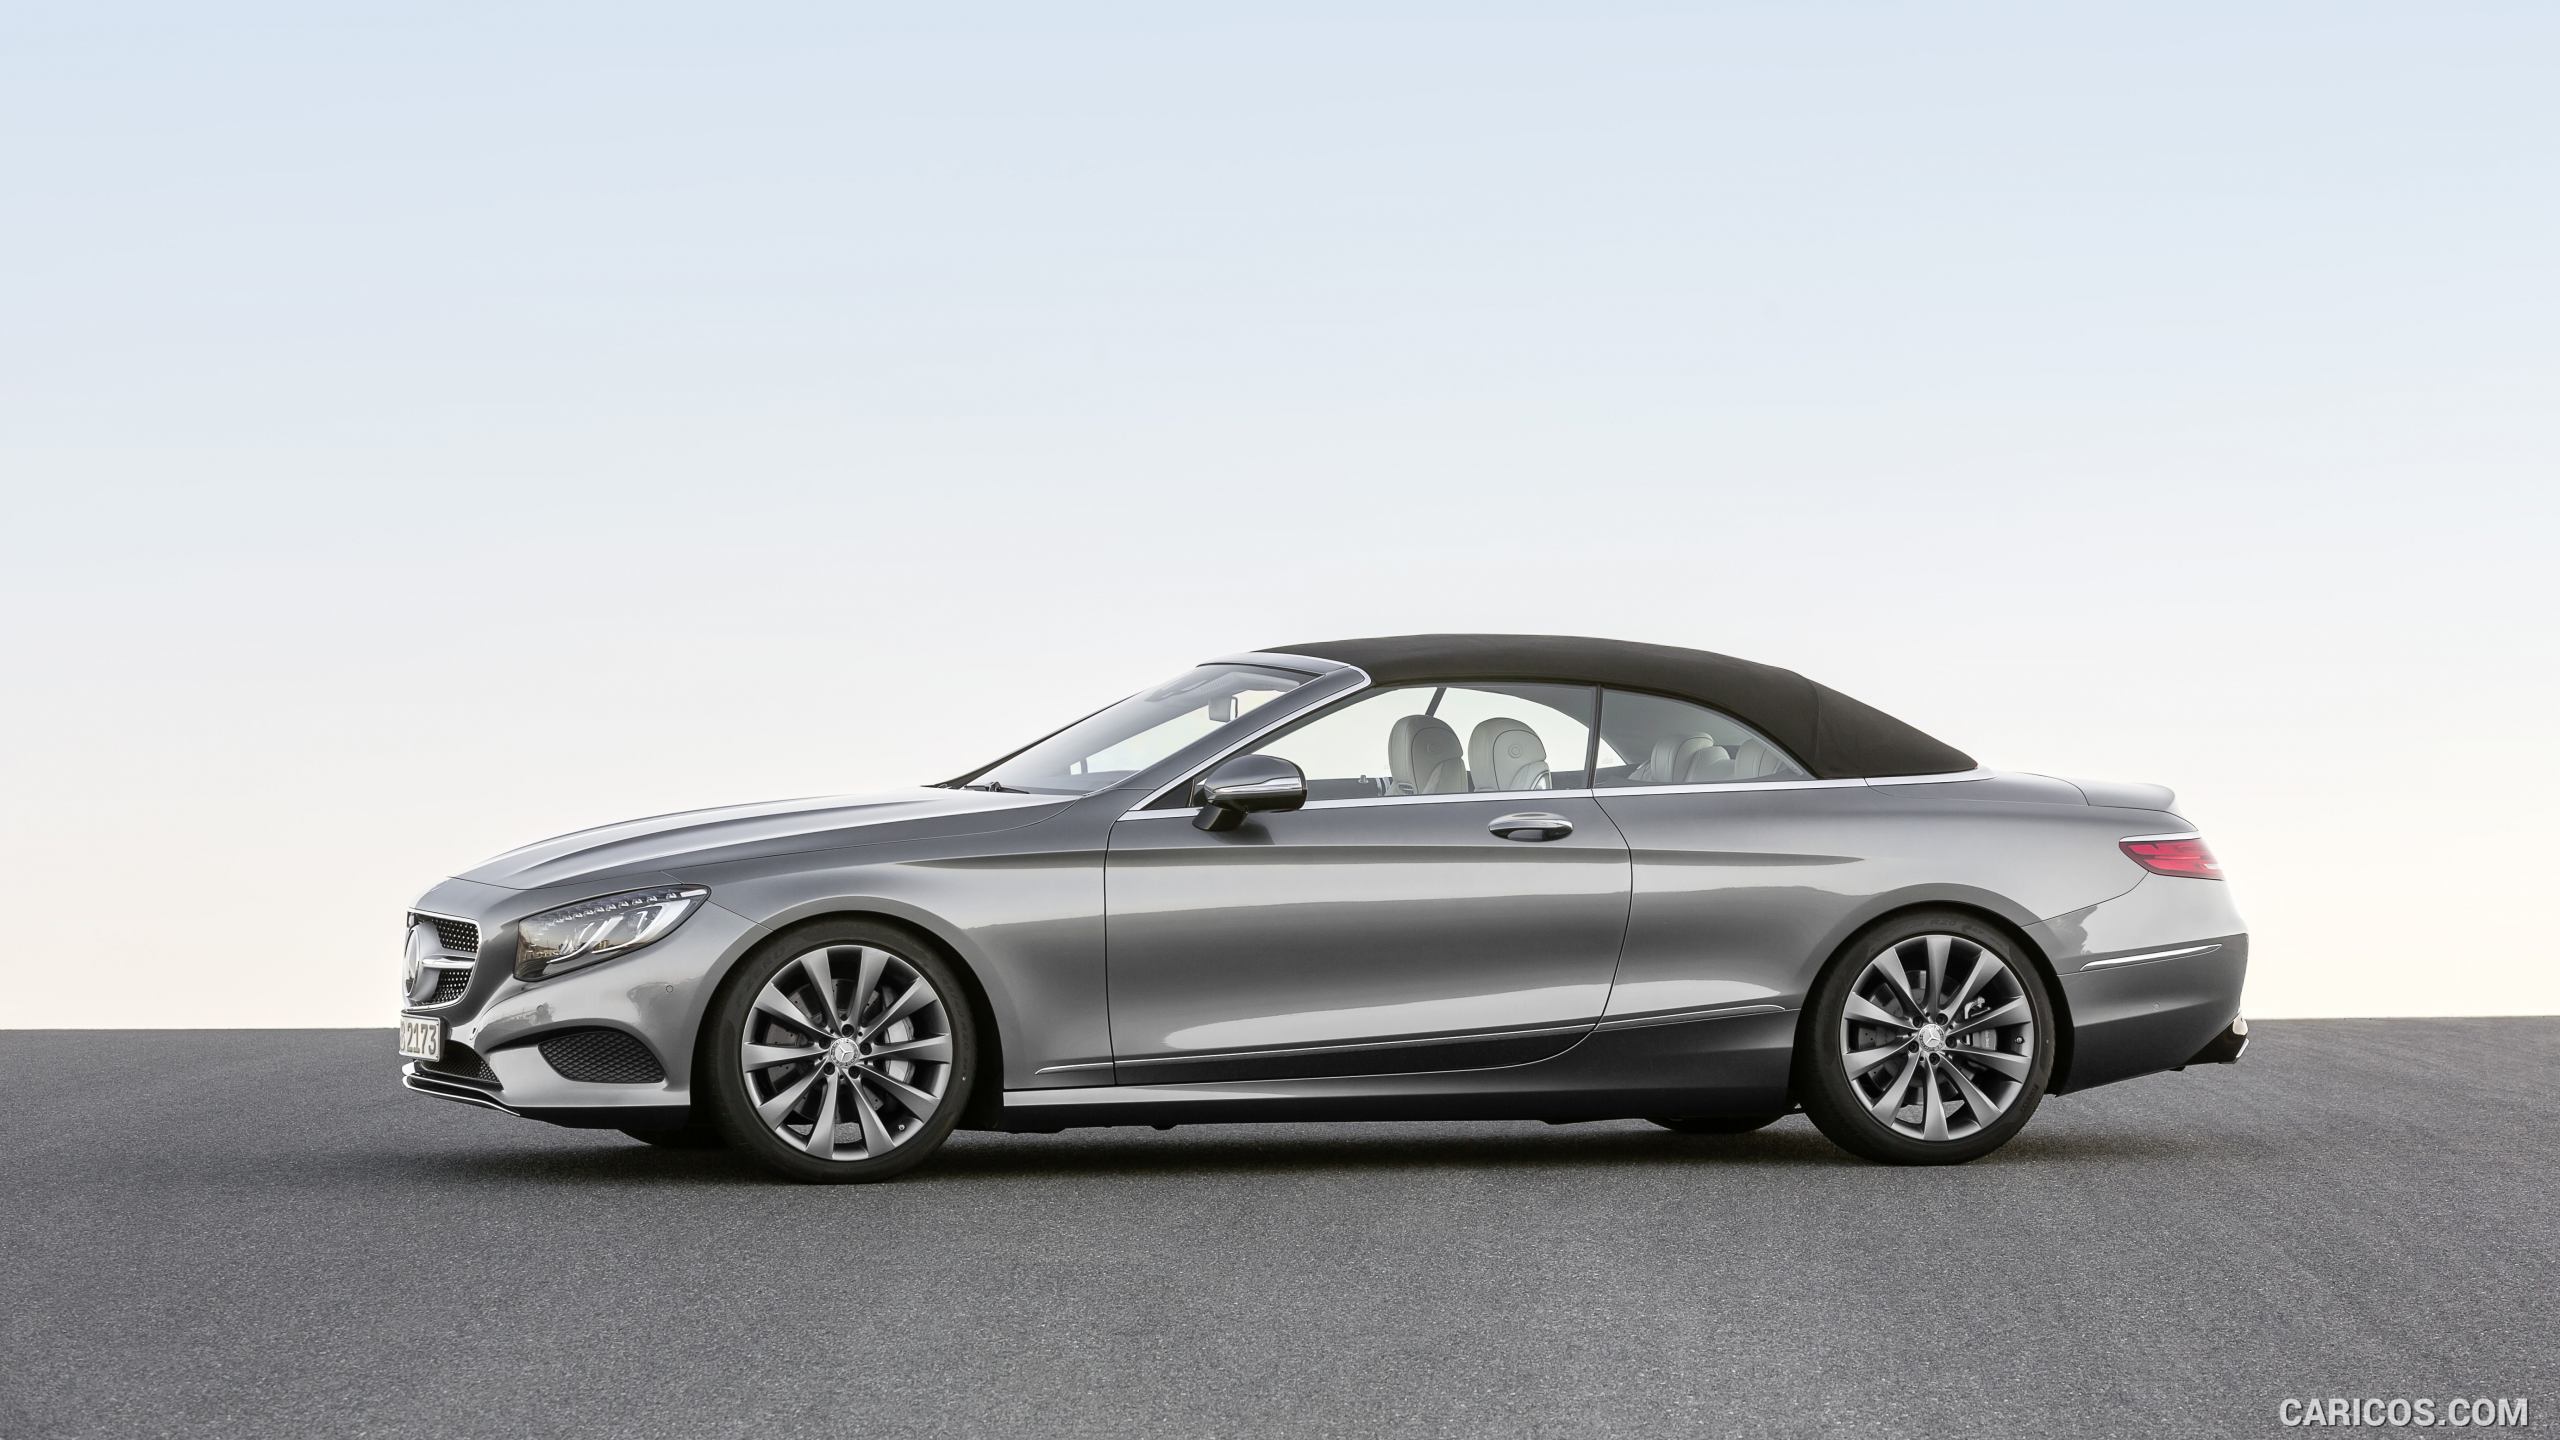 2017 Mercedes-Benz S-Class S500 Cabriolet (Selenit Grey) - Side, #14 of 56